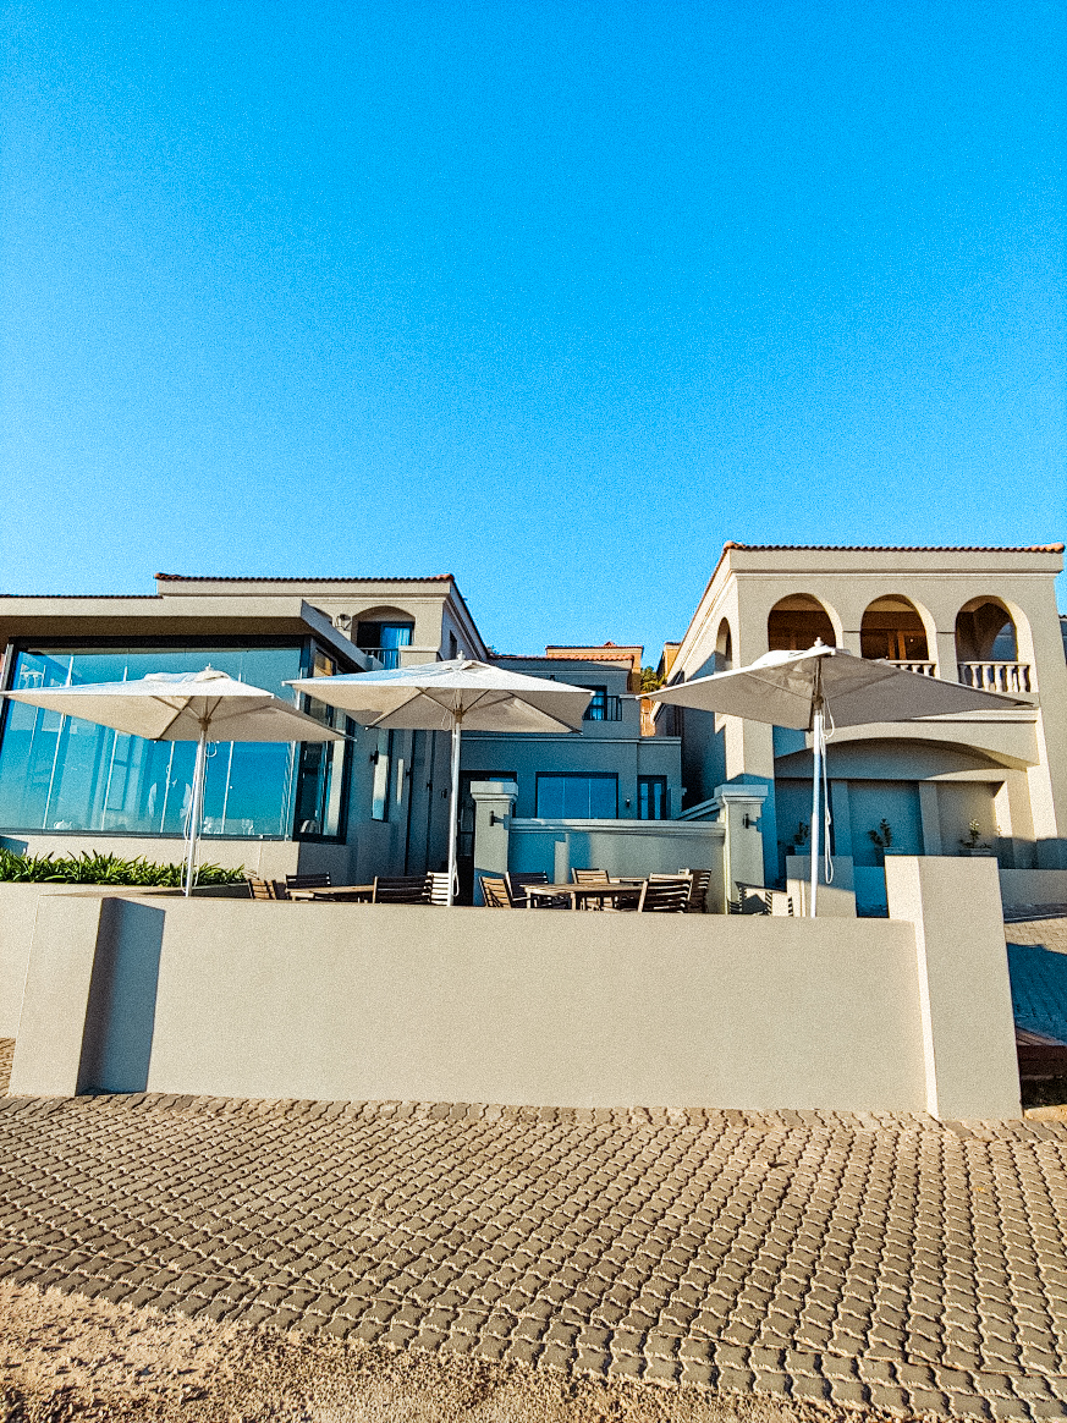 A Review of The Northcliff Boutique Hotel